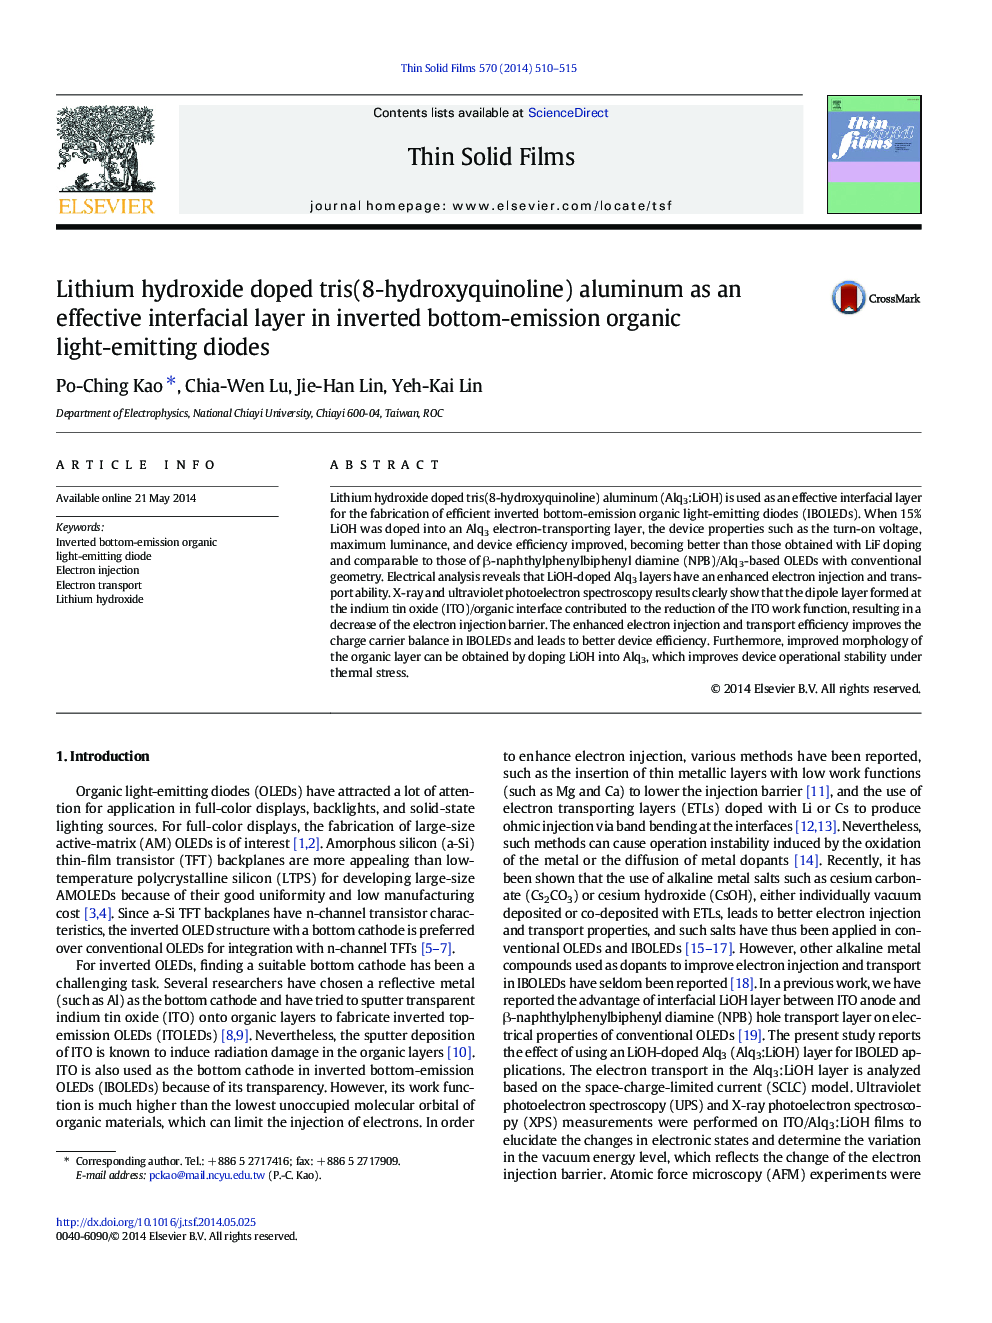 Lithium hydroxide doped tris(8-hydroxyquinoline) aluminum as an effective interfacial layer in inverted bottom-emission organic light-emitting diodes